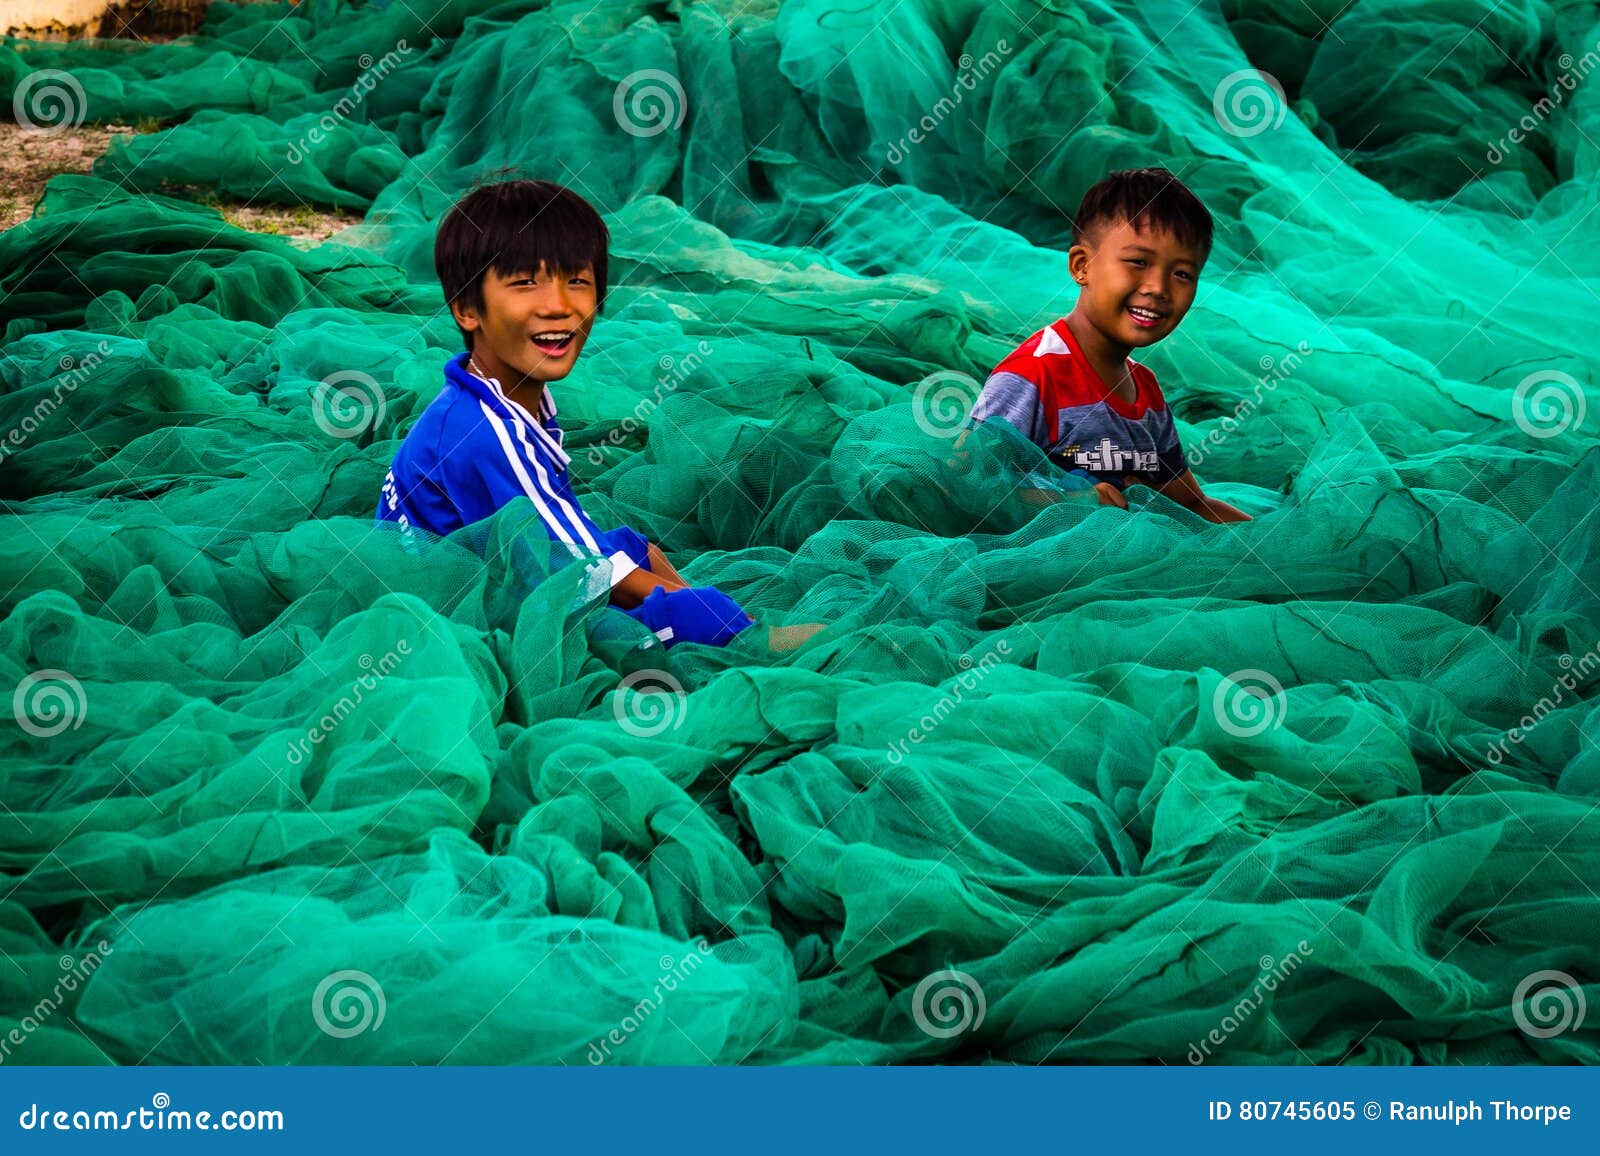 Kids Playing in Fishing Nets Editorial Image - Image of harbour, fishing:  80745605